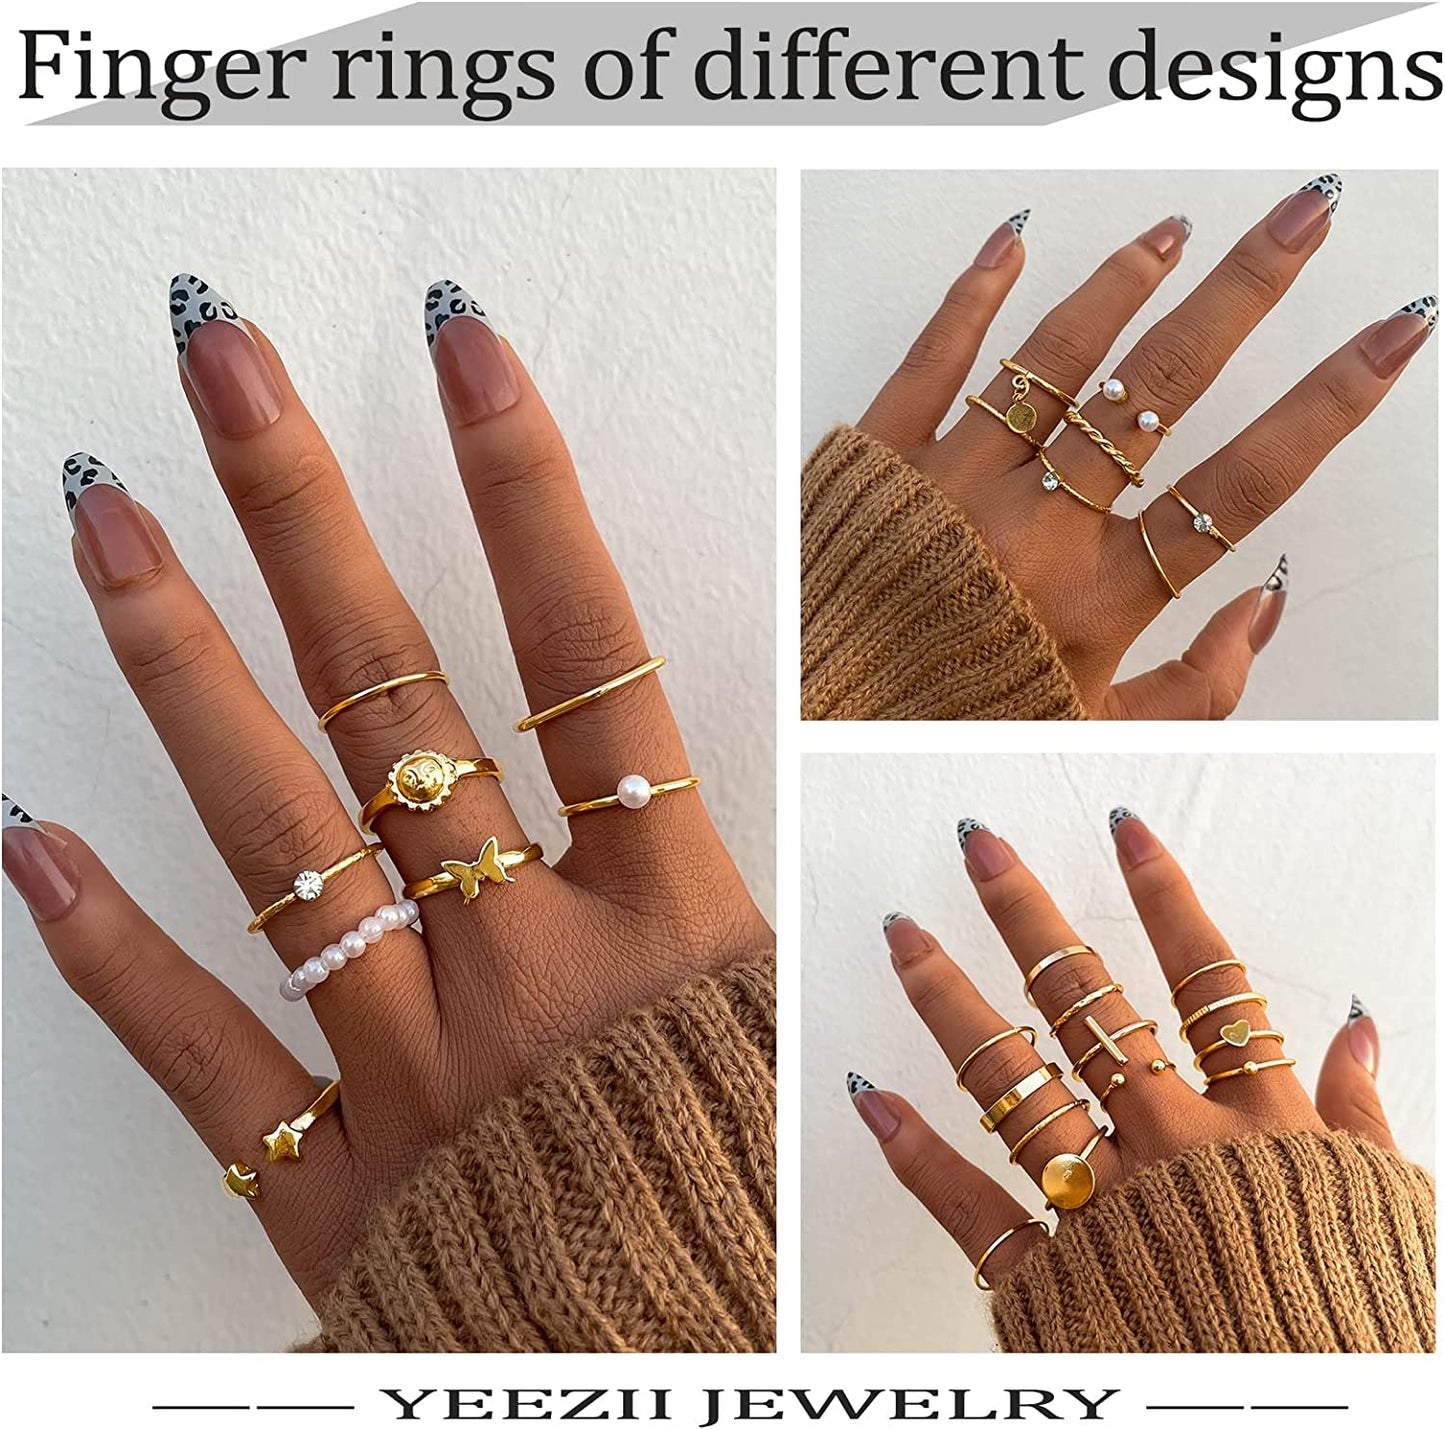 68 Pcs Gold Knuckle Rings Set for Women Girls, Stackable Rings Boho Joint Finger Midi Rings Silver Hollow Carved Crystal Stacking Rings Pack for Gift